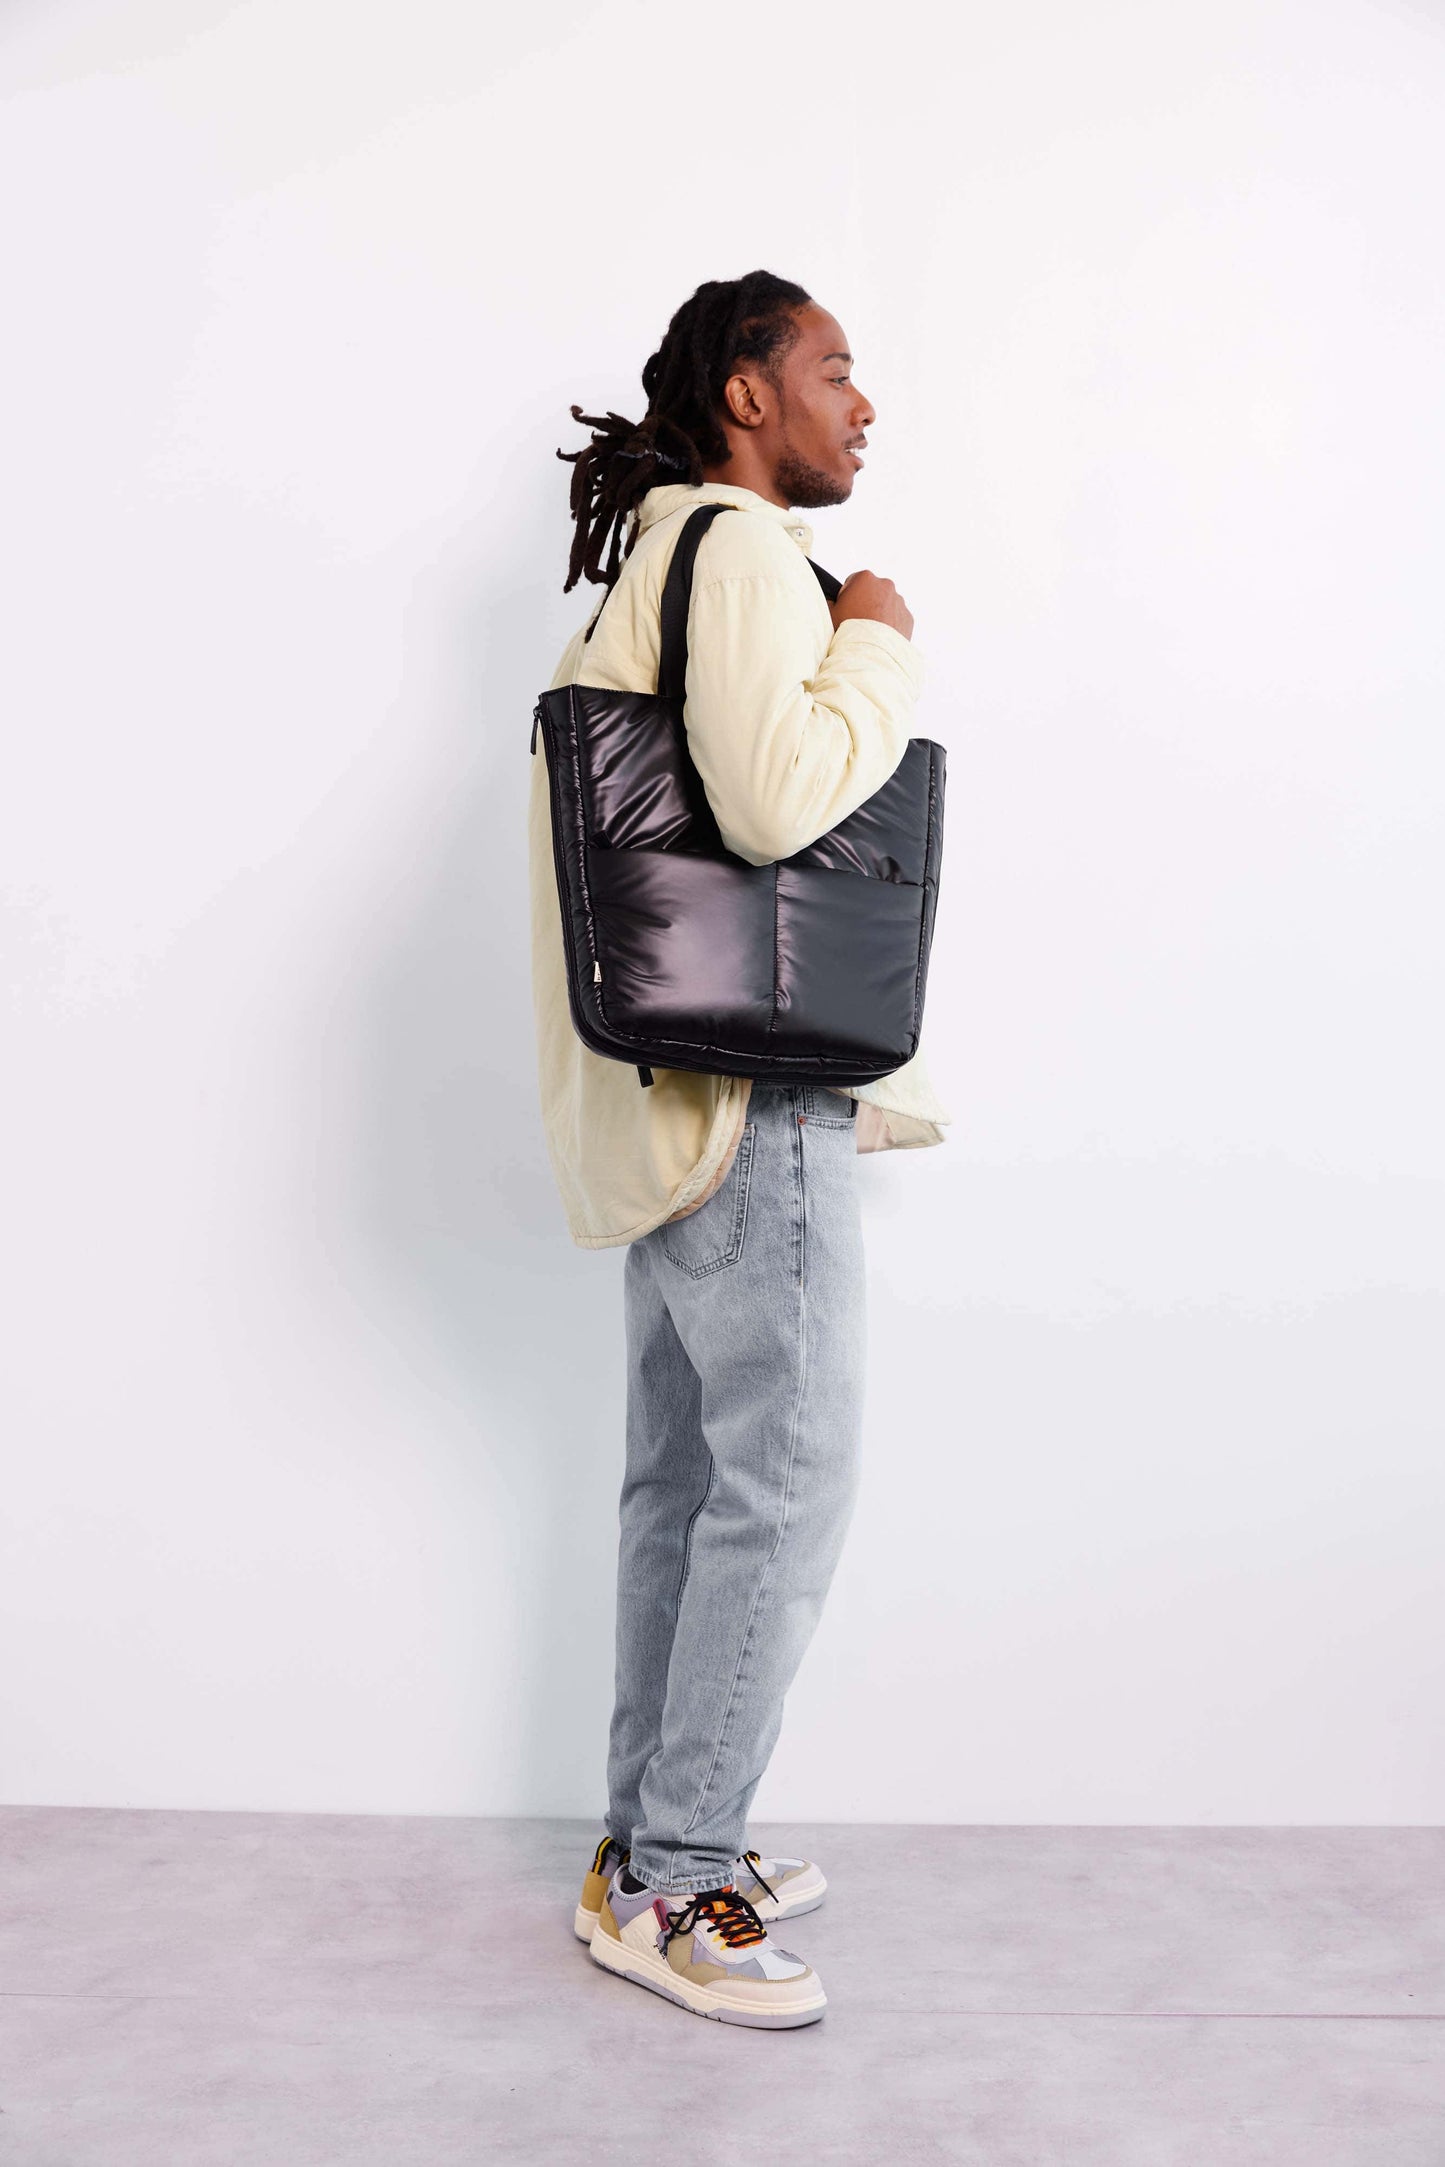 The Expandable Tote in Black